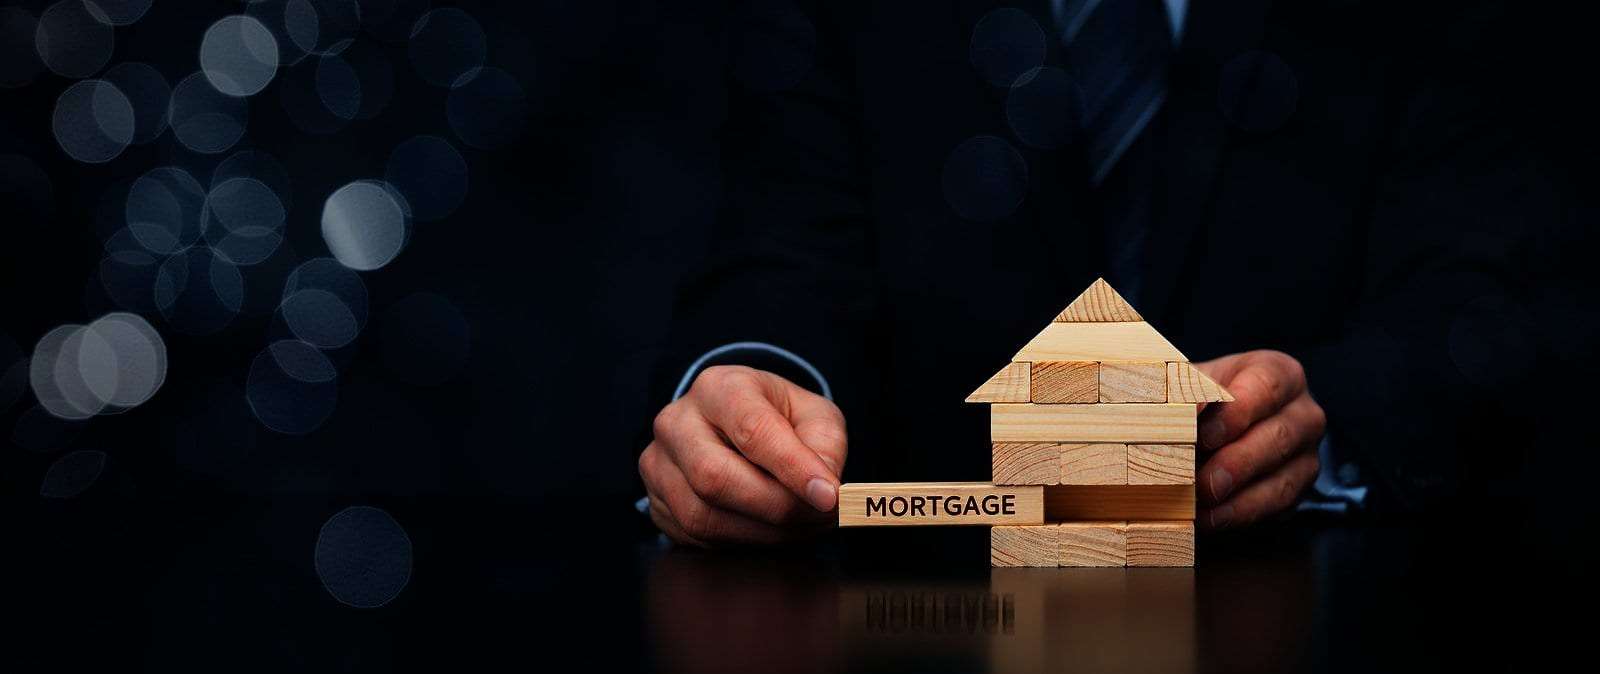 Is Mortgage the Best Way to Finance Rental Property ...